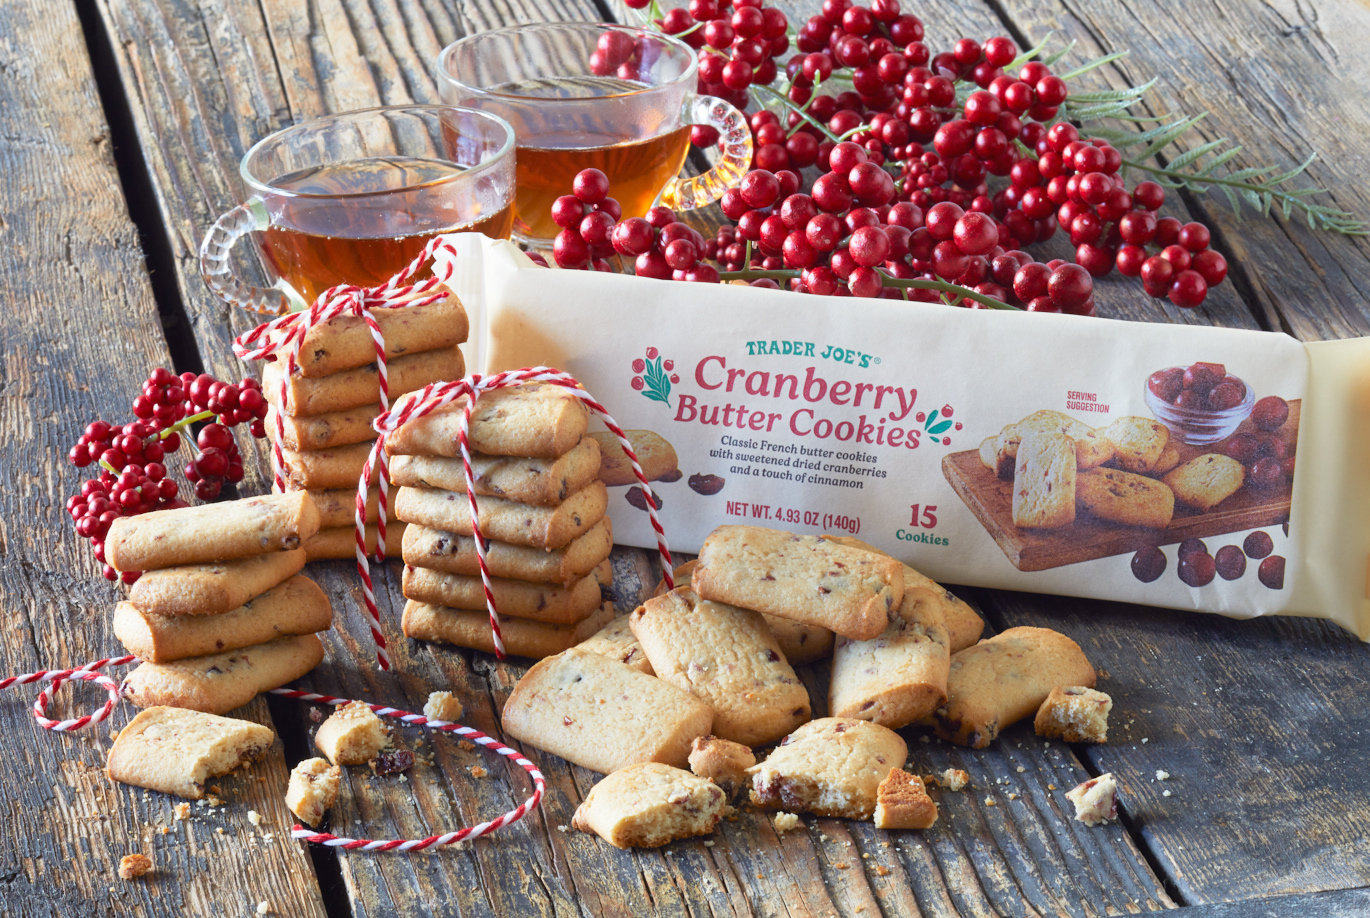 Trader Joe's Cranberry Butter Cookies; on rustic wood surface surrounded with red berries and two teacups